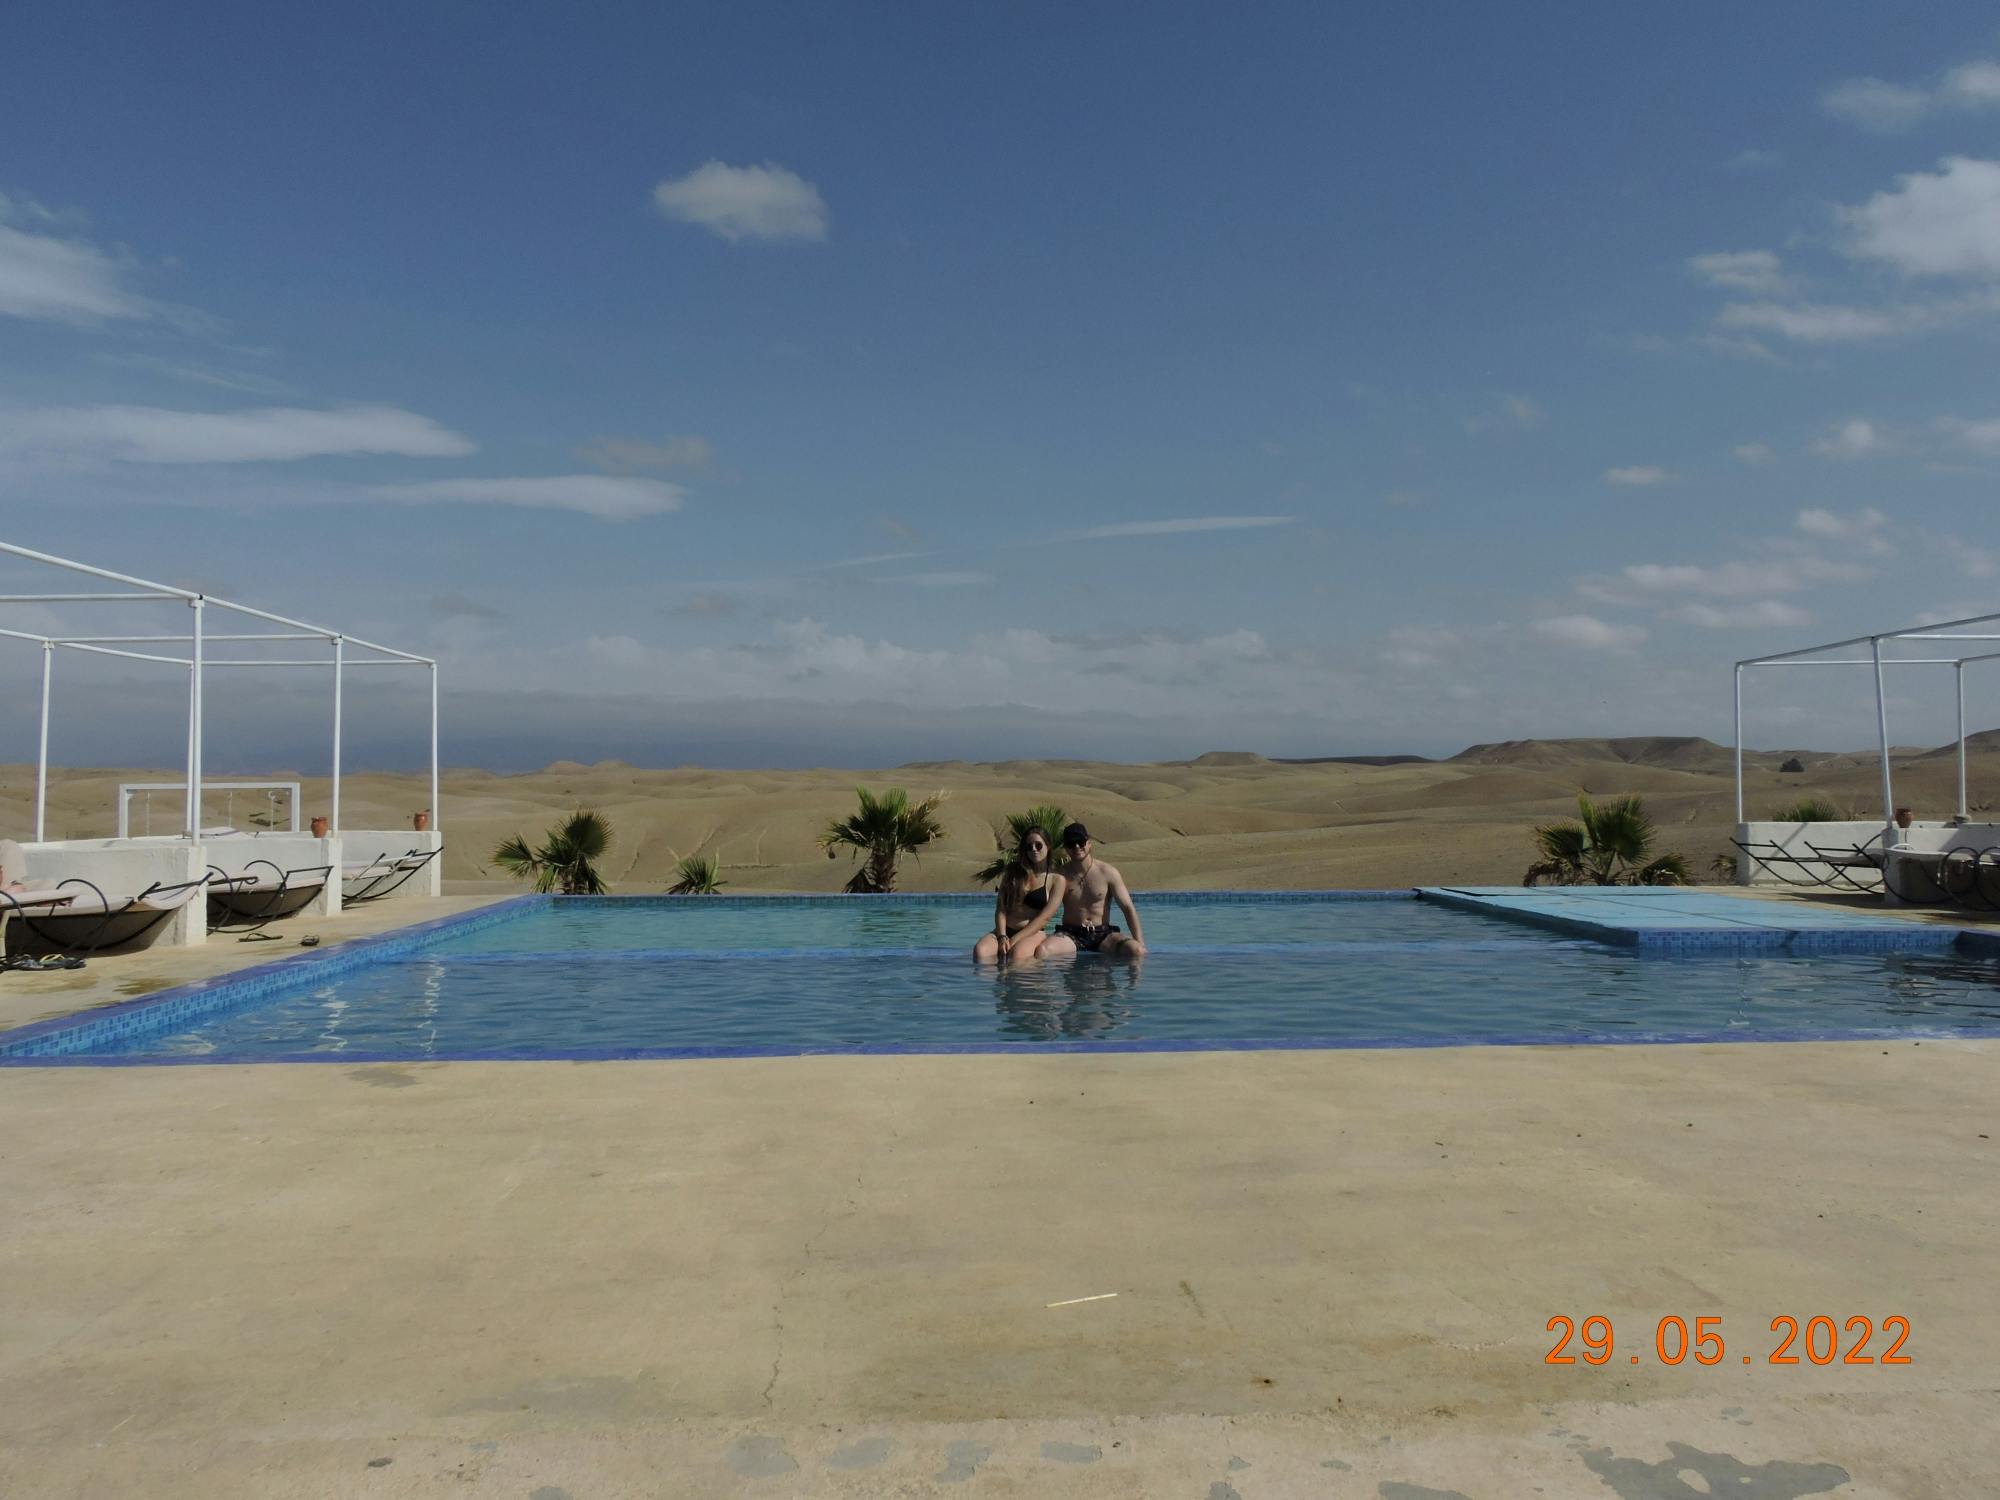 Tour to Agafay Desert with lunch time by the swimming pool Musement